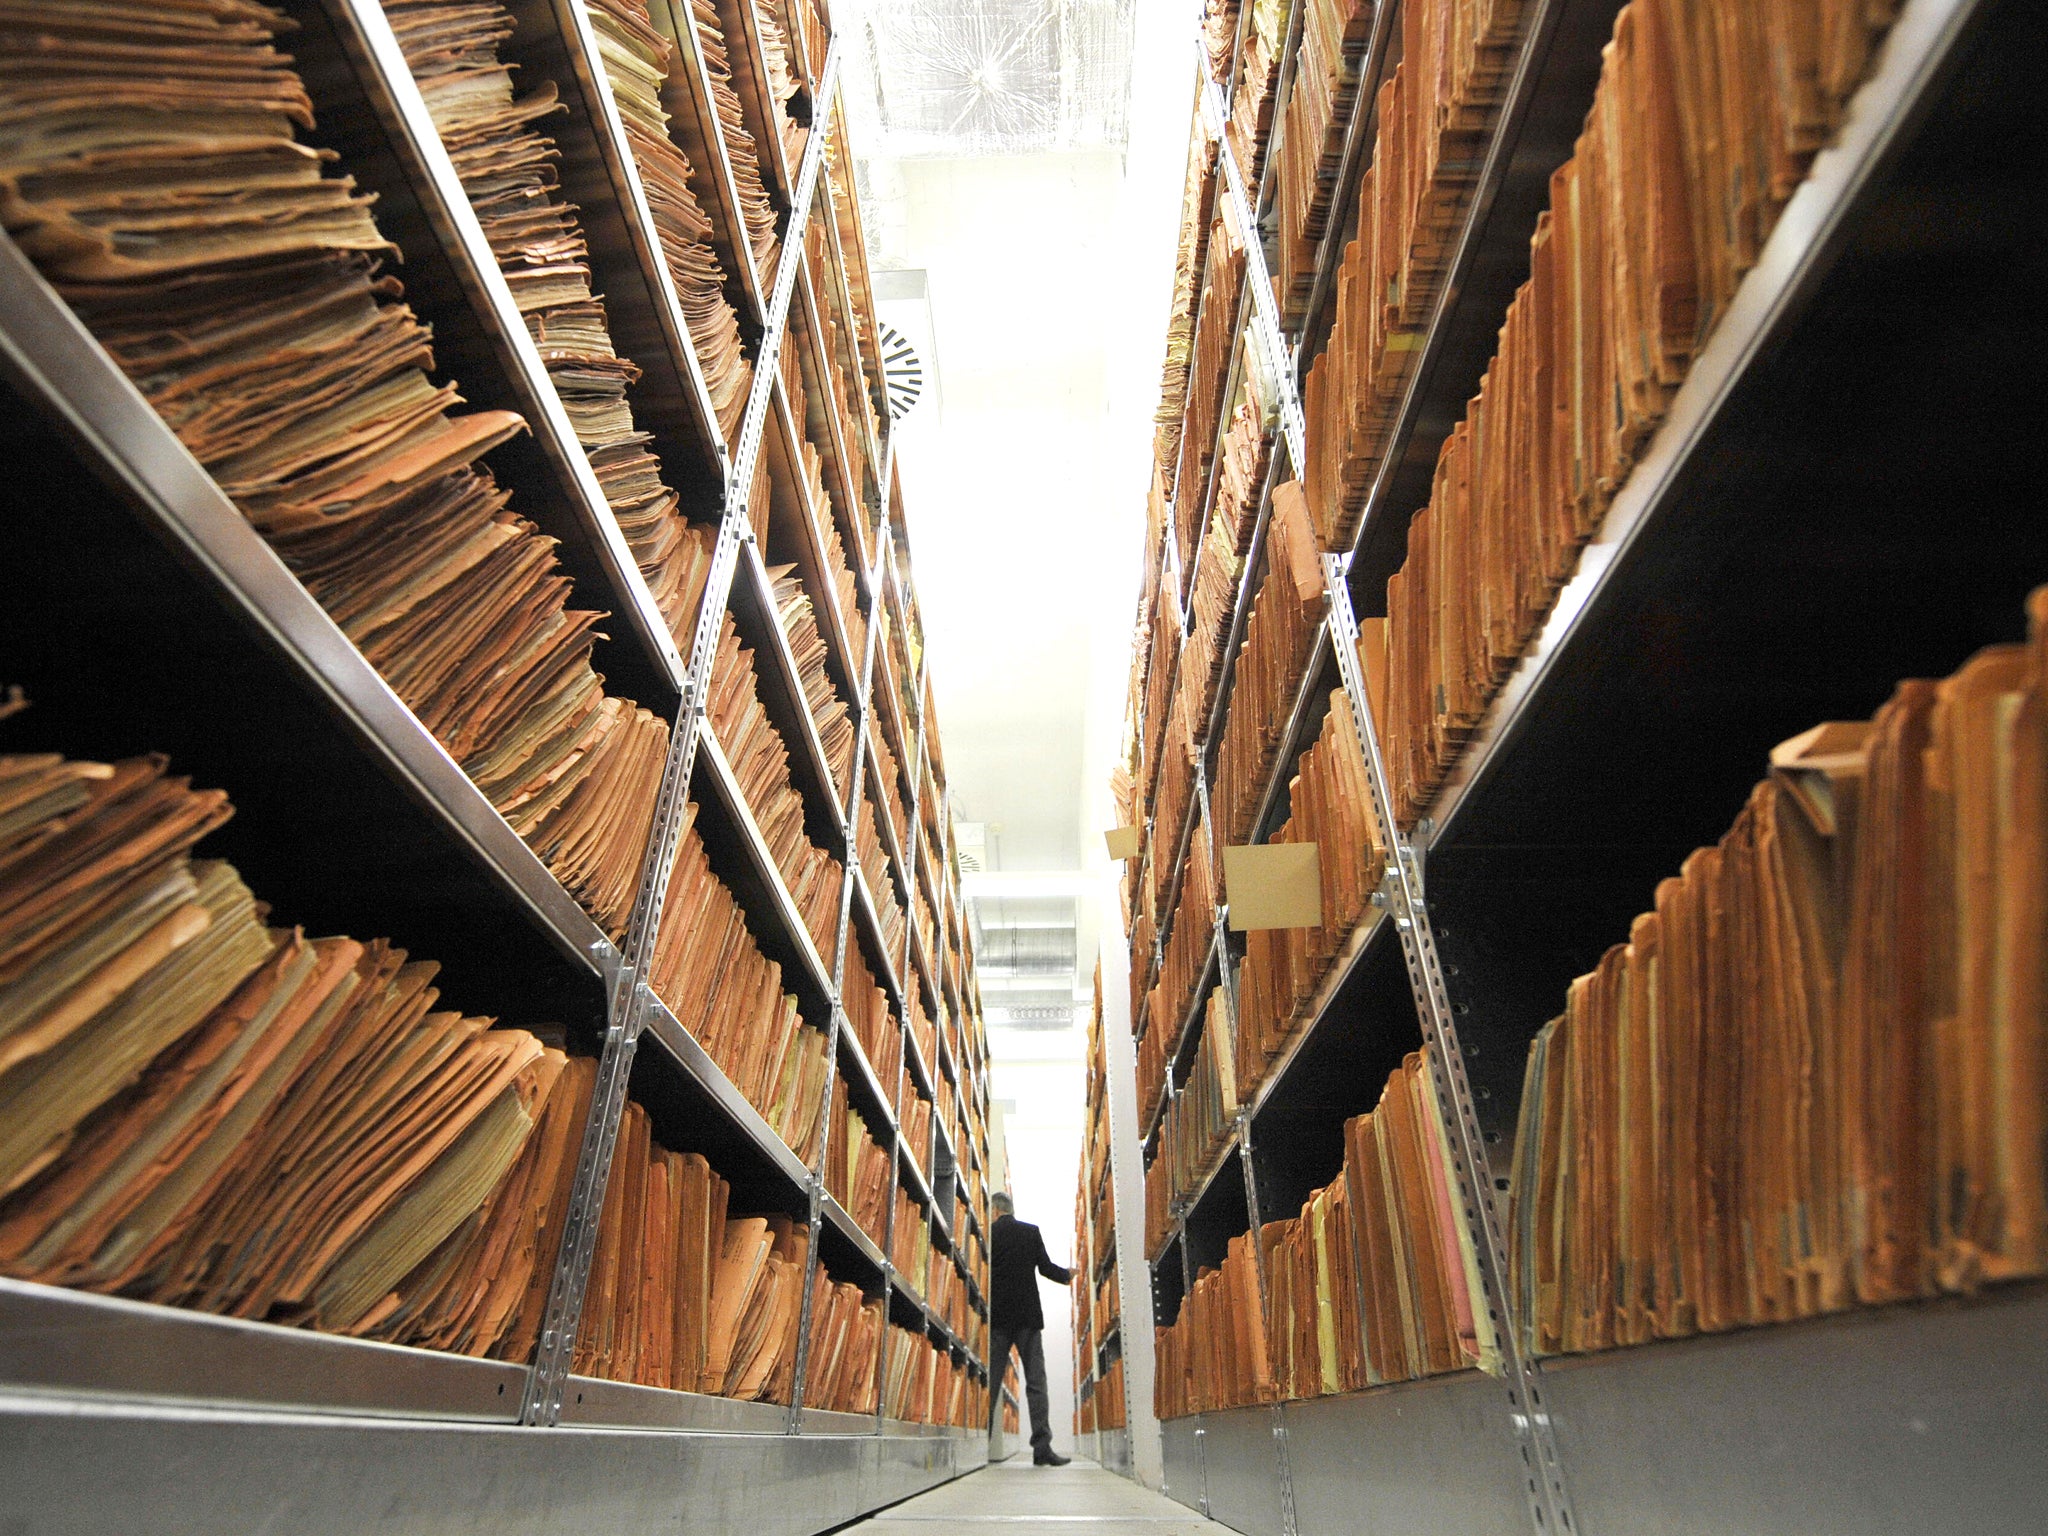 Hundreds of files in the archives of the former East German secret police, known as the Stasi, in Berlin